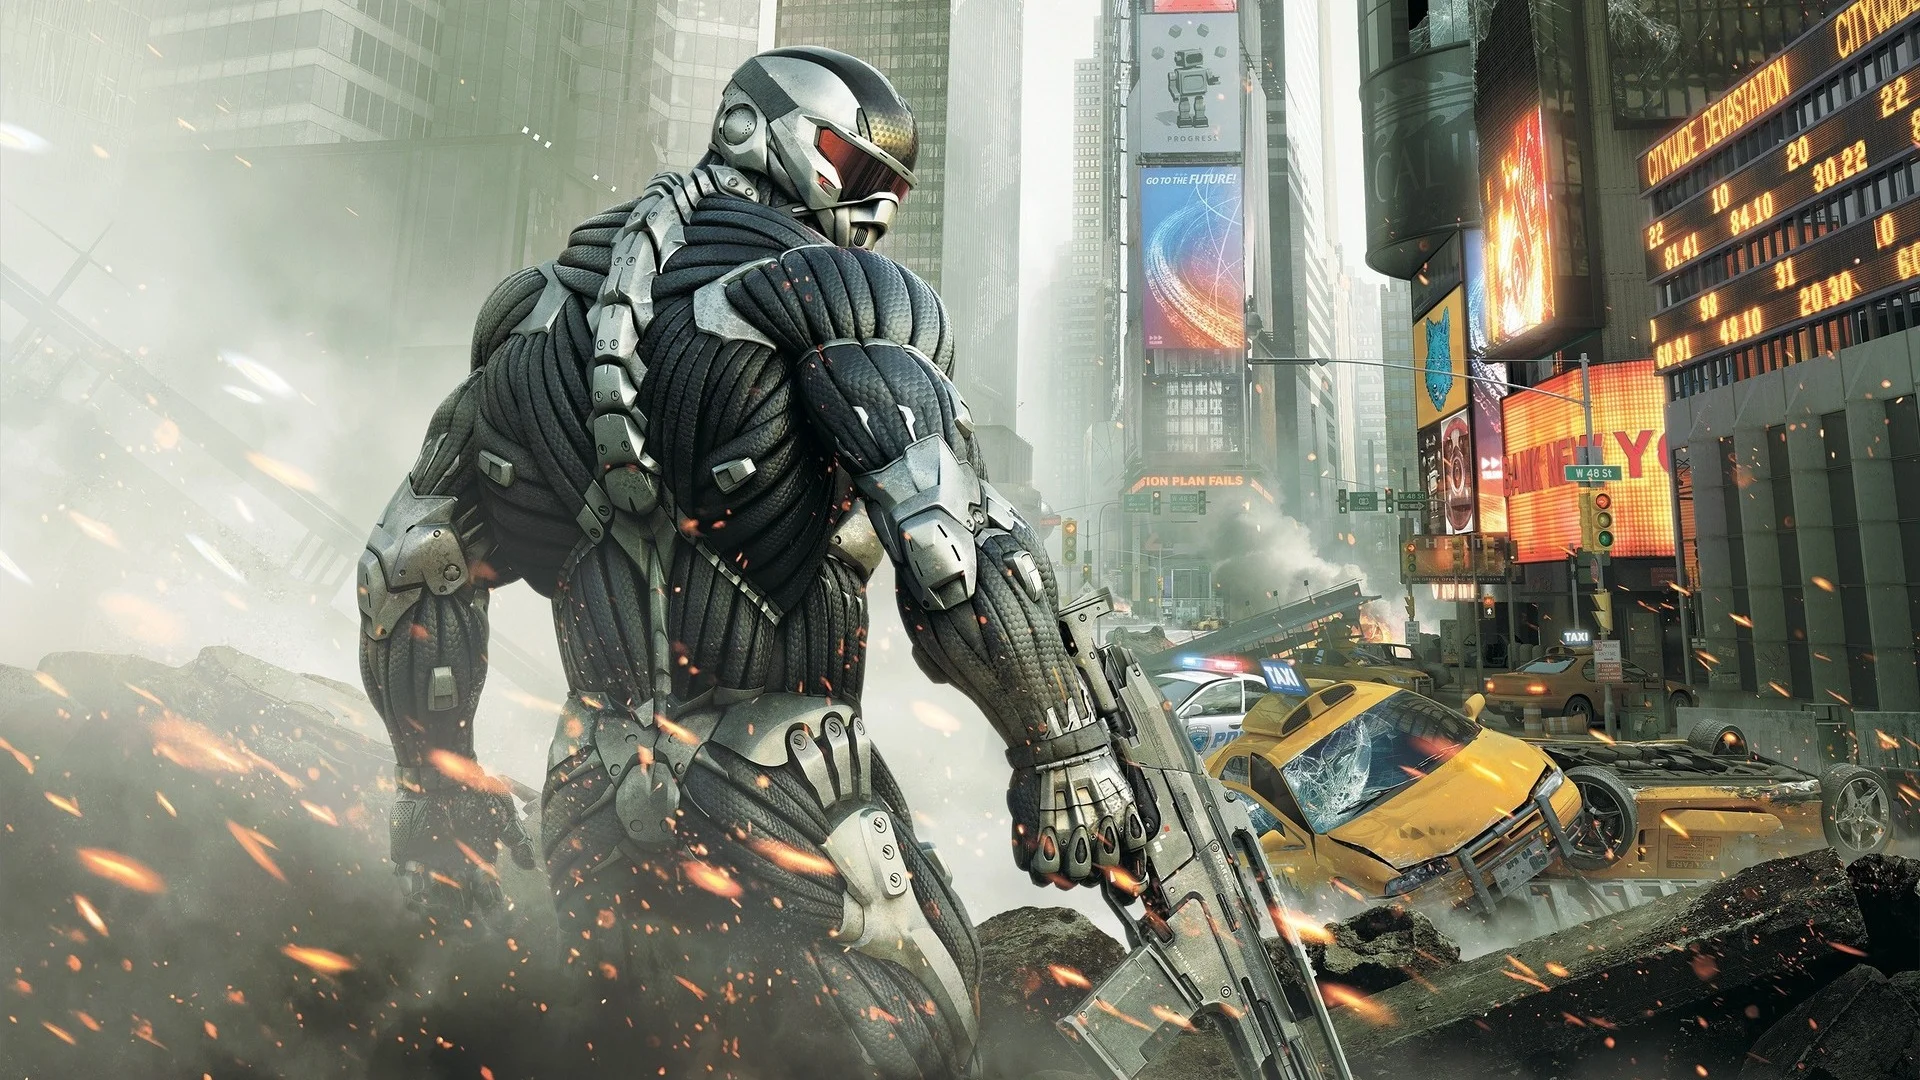 Crysis 4 may yet see the light of day